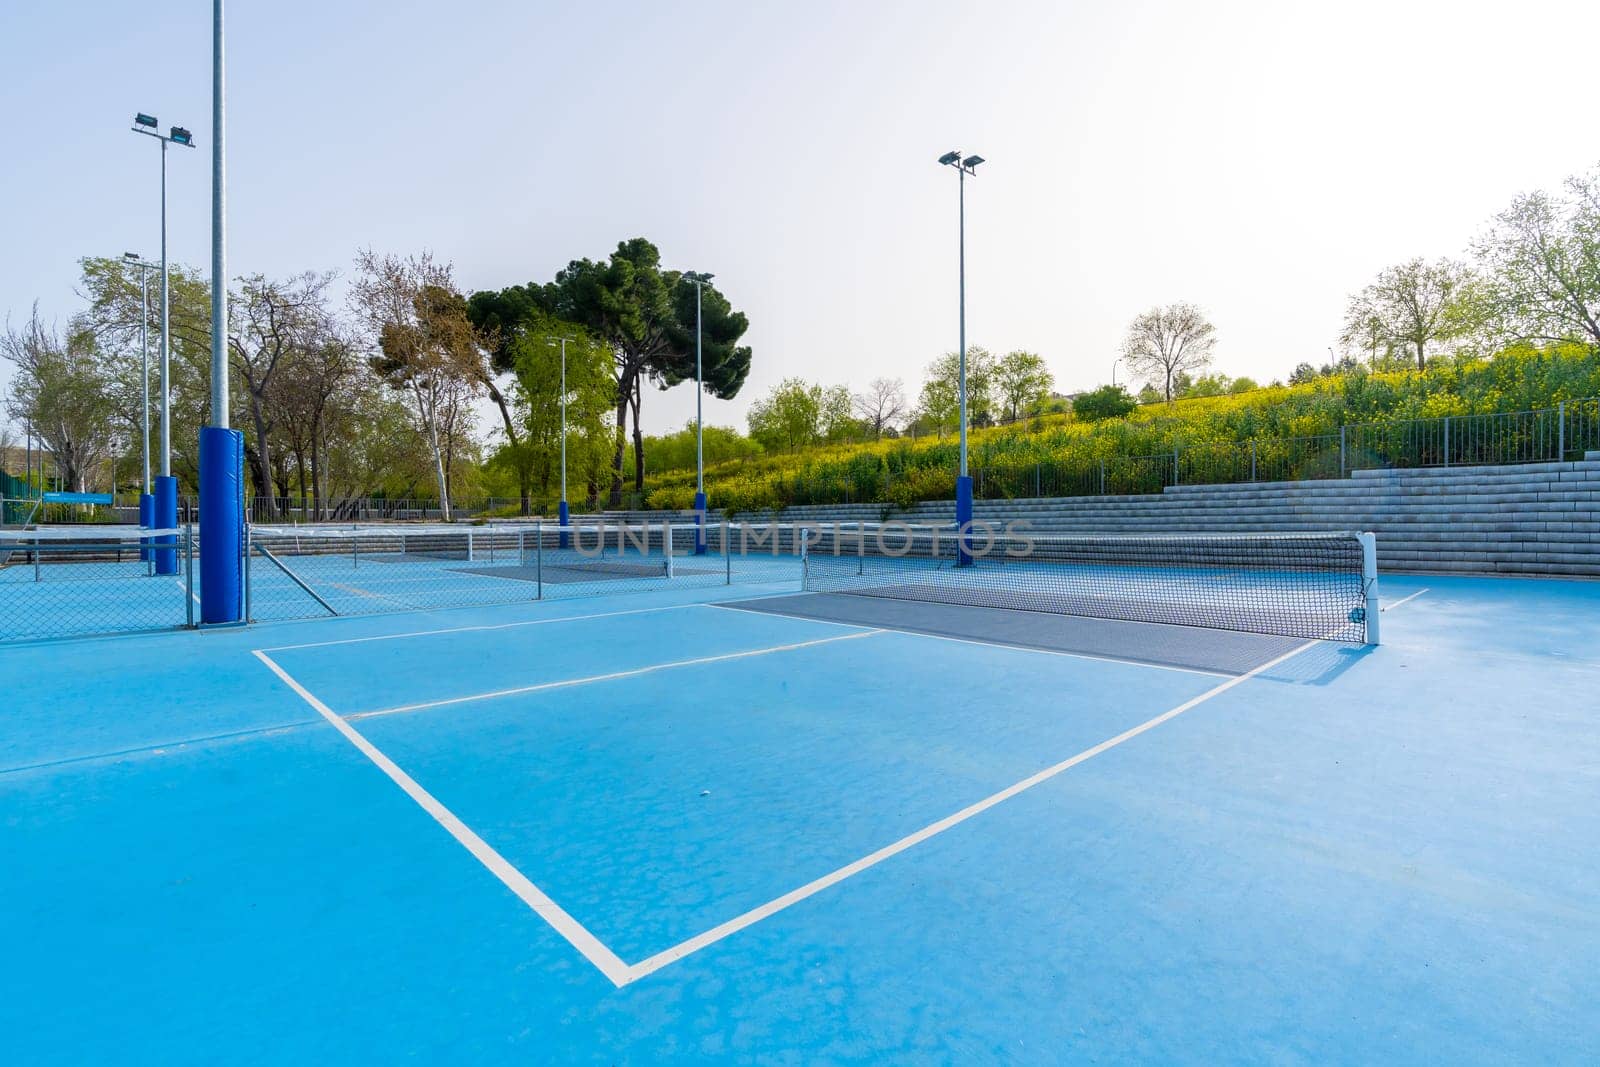 Pickleball outdoors court with no people around by Huizi